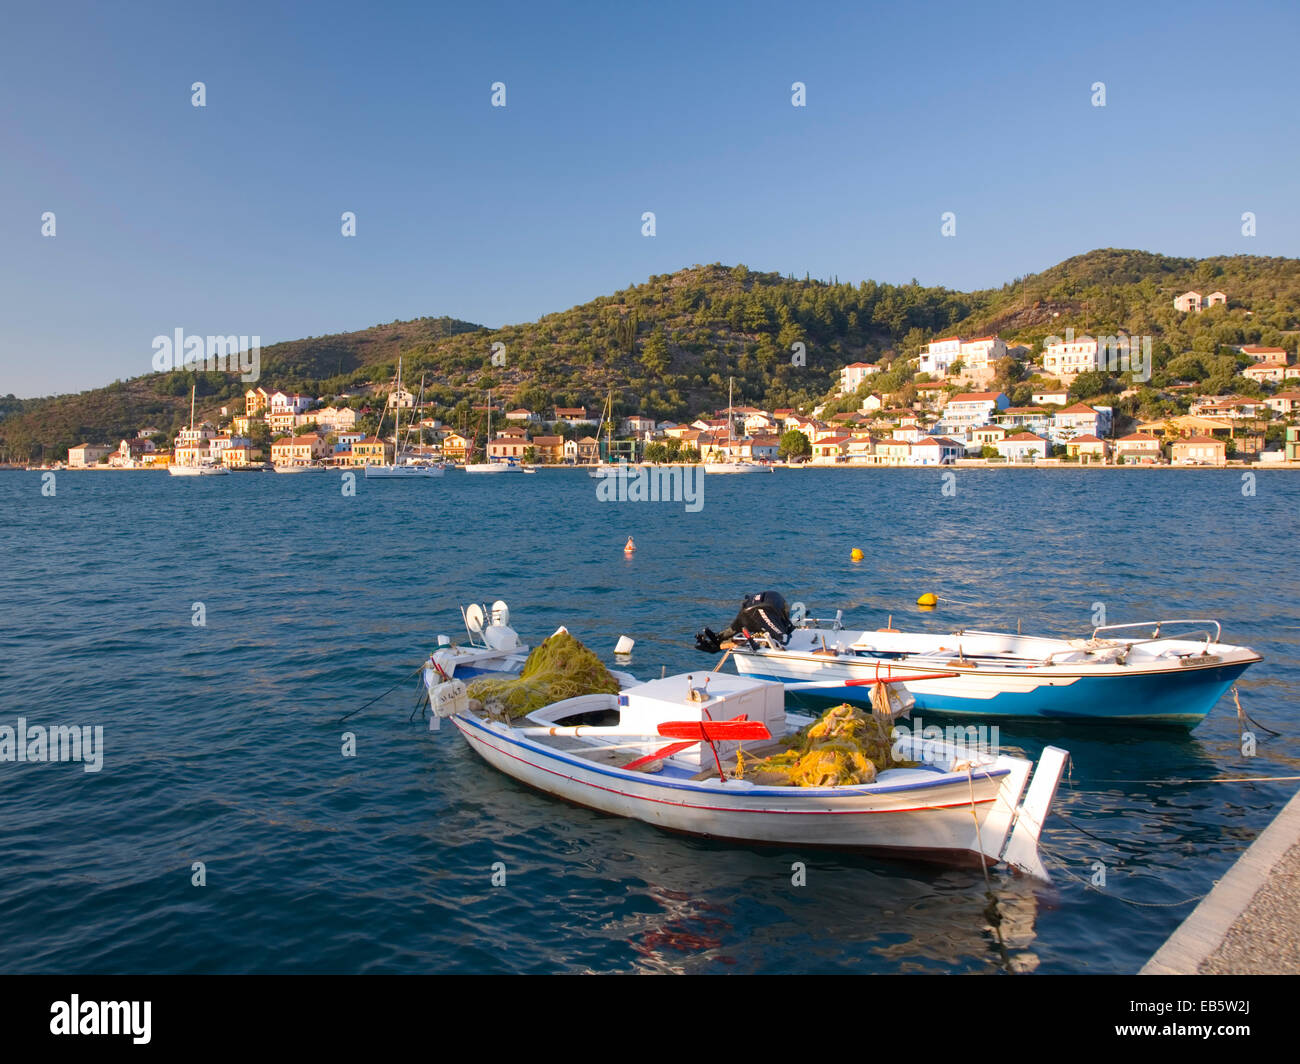 Vathy, Ithaca, Ionian Islands, Greece. View across the harbour, fishing boats in foreground. Stock Photo